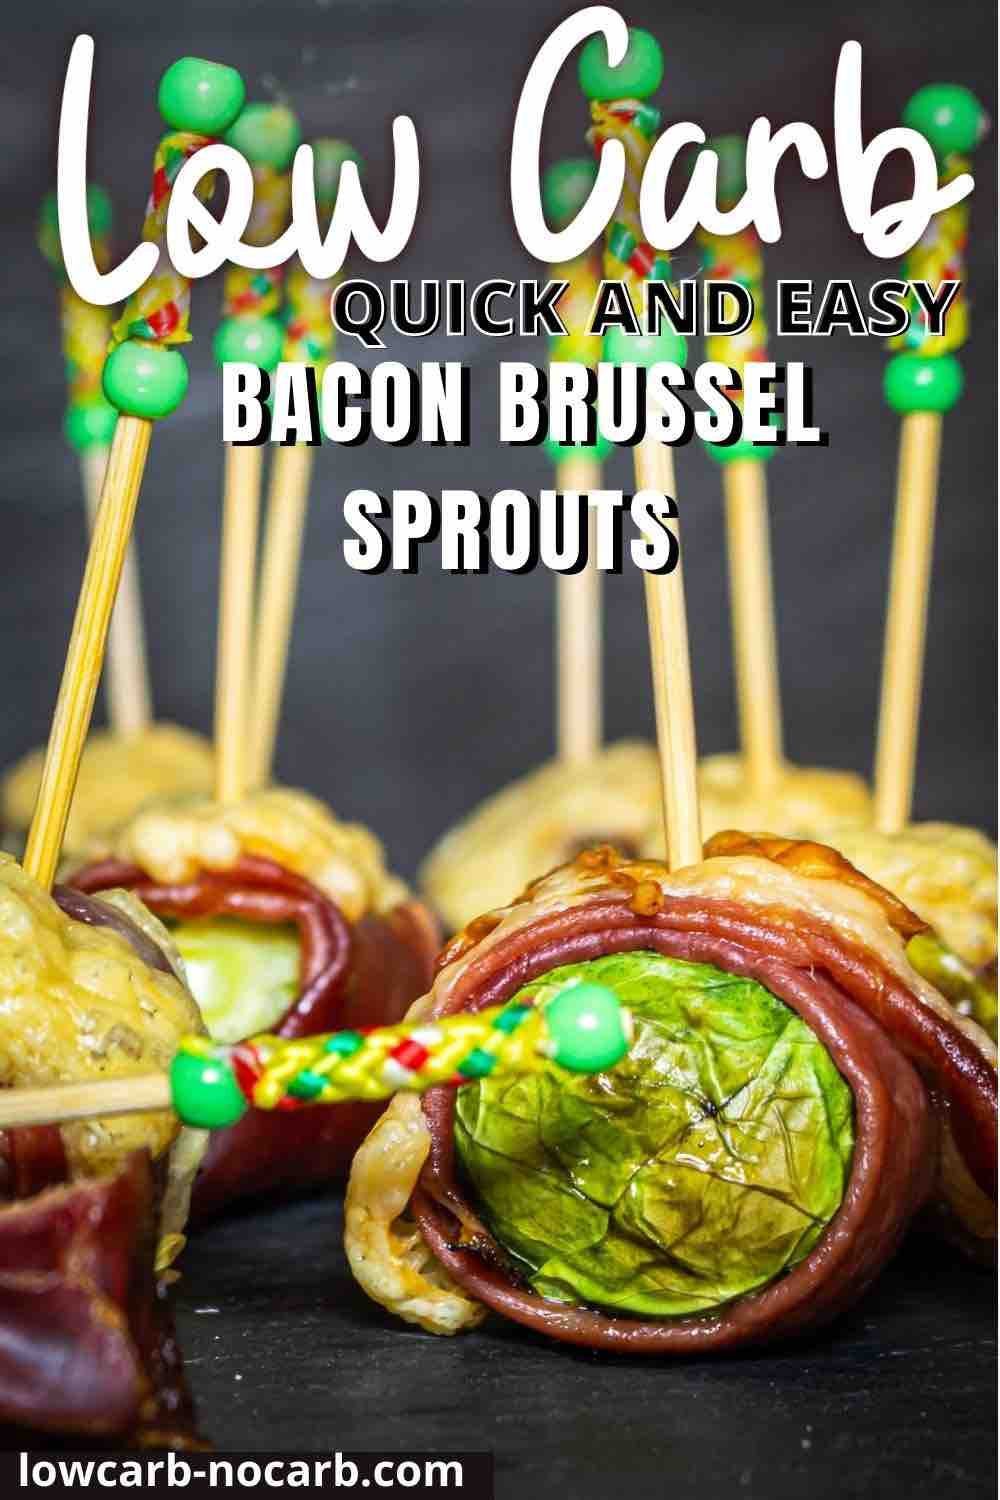 Brussels sprouts wrapped in bacon served as a finger food.